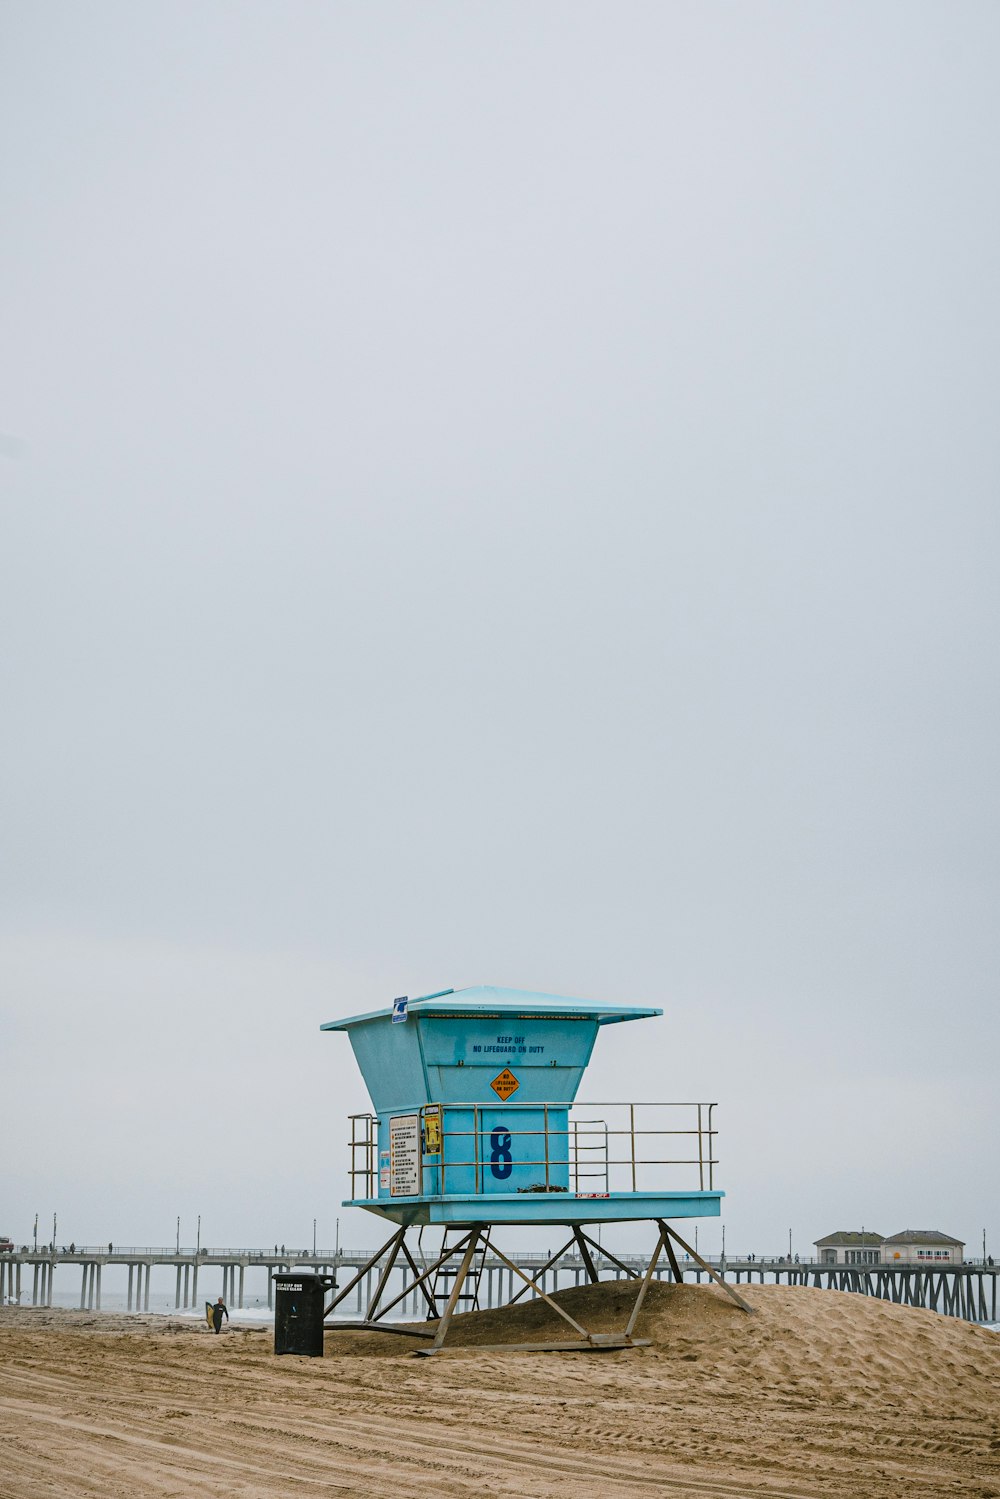 a lifeguard stand on a beach with a pier in the background